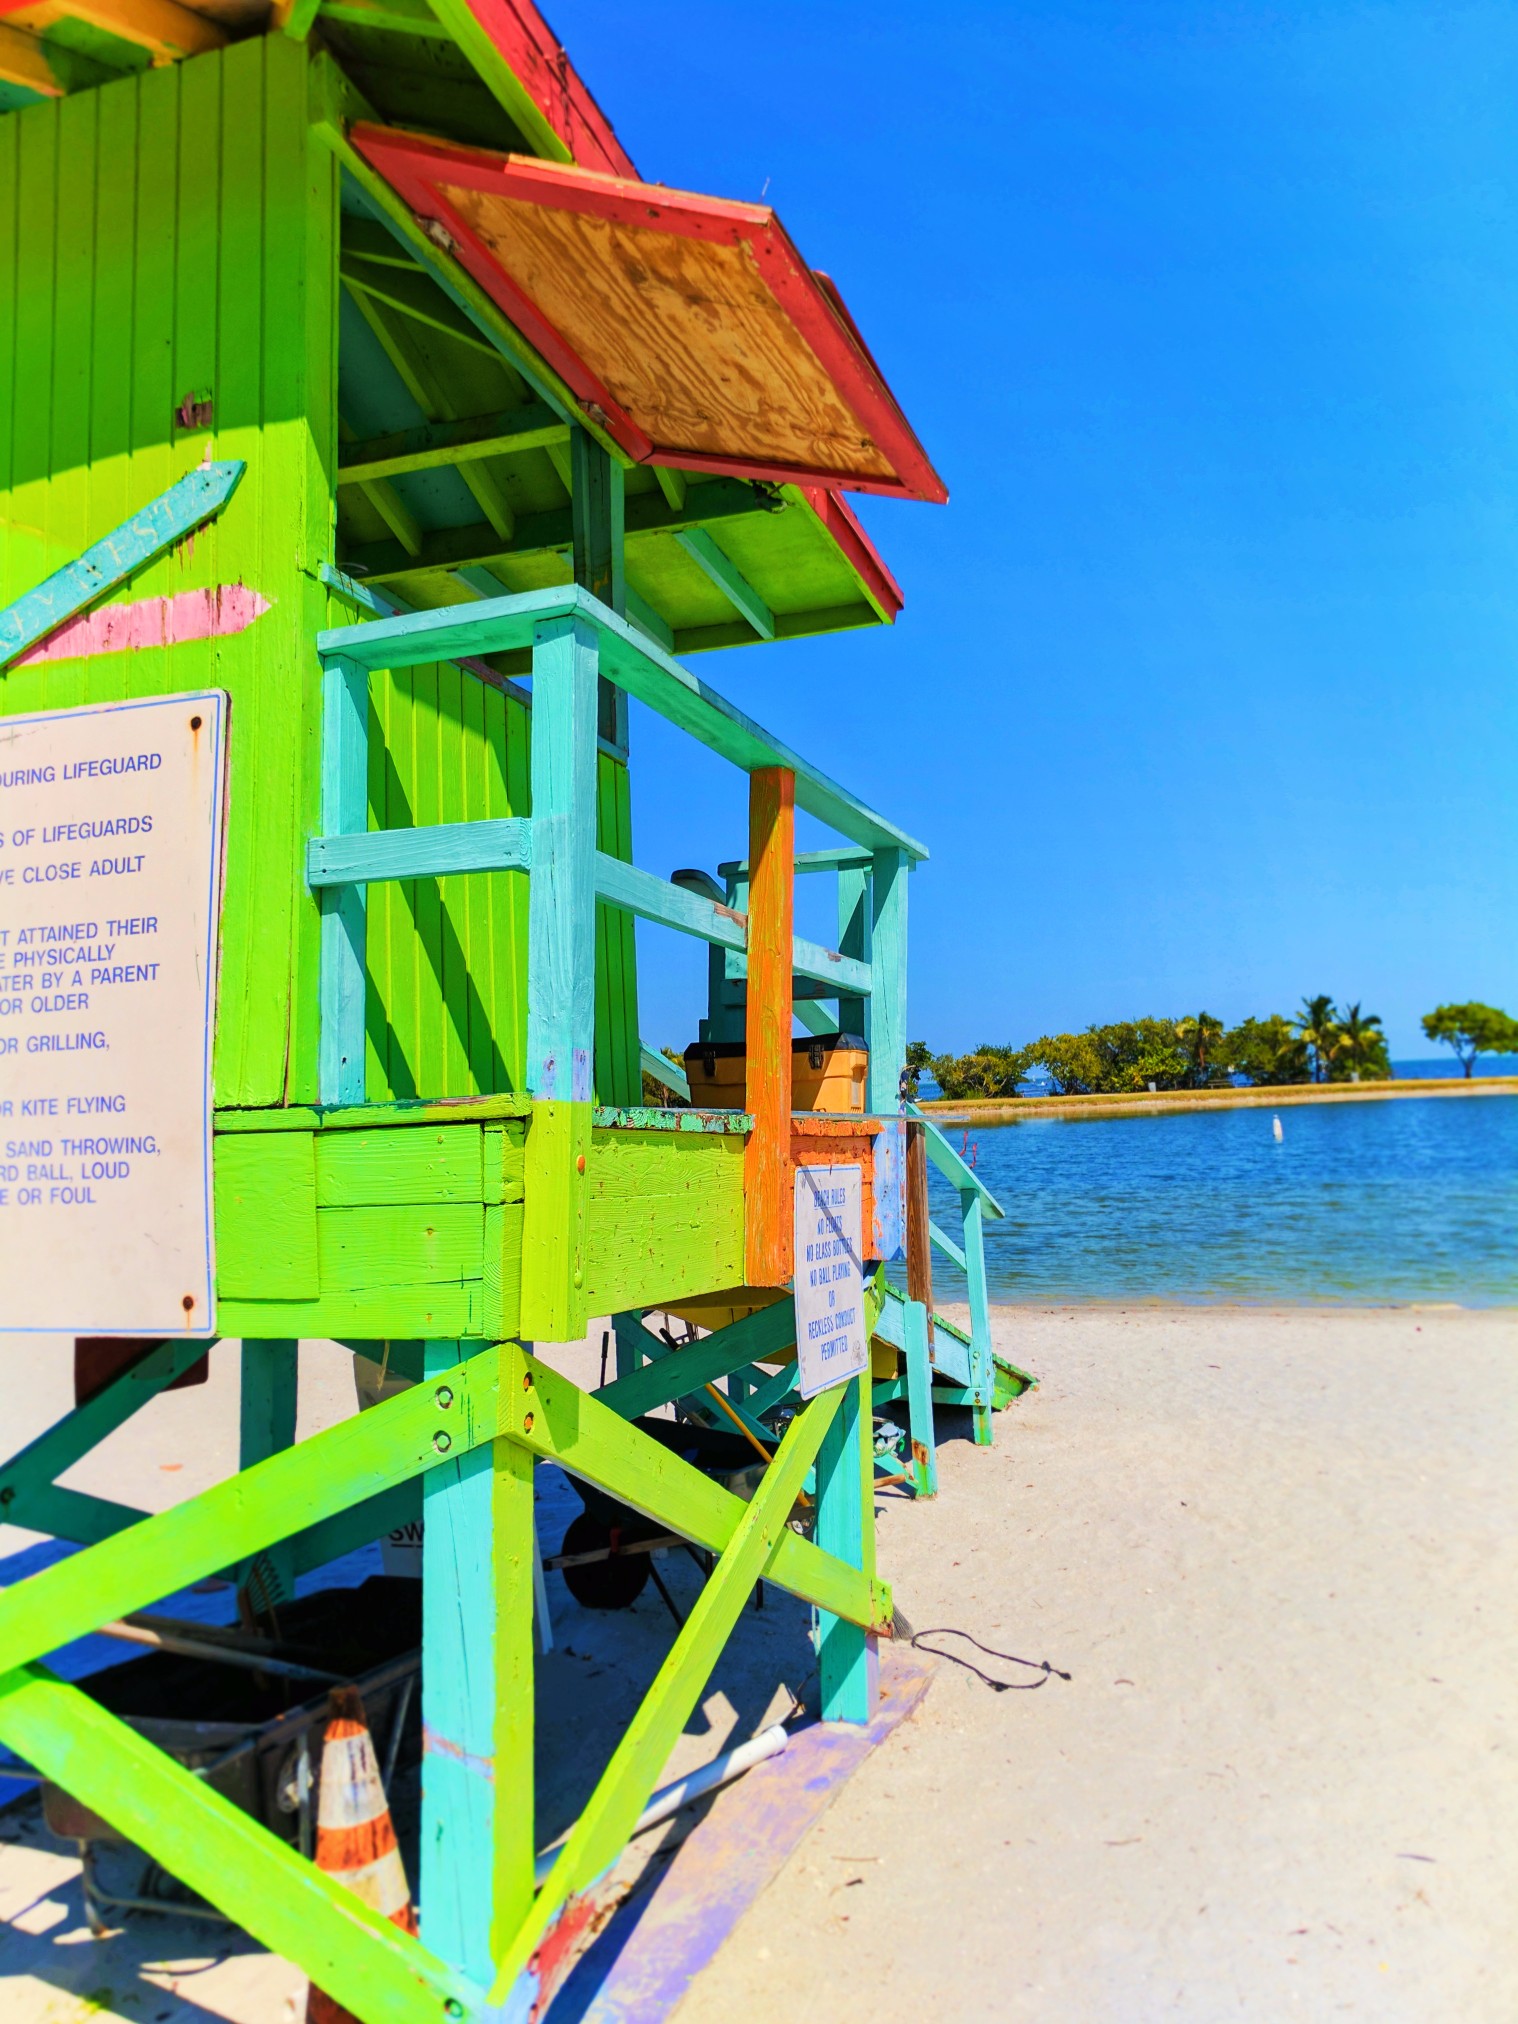 Lifeguard Station at Biscayne Miami Dade County Park 1